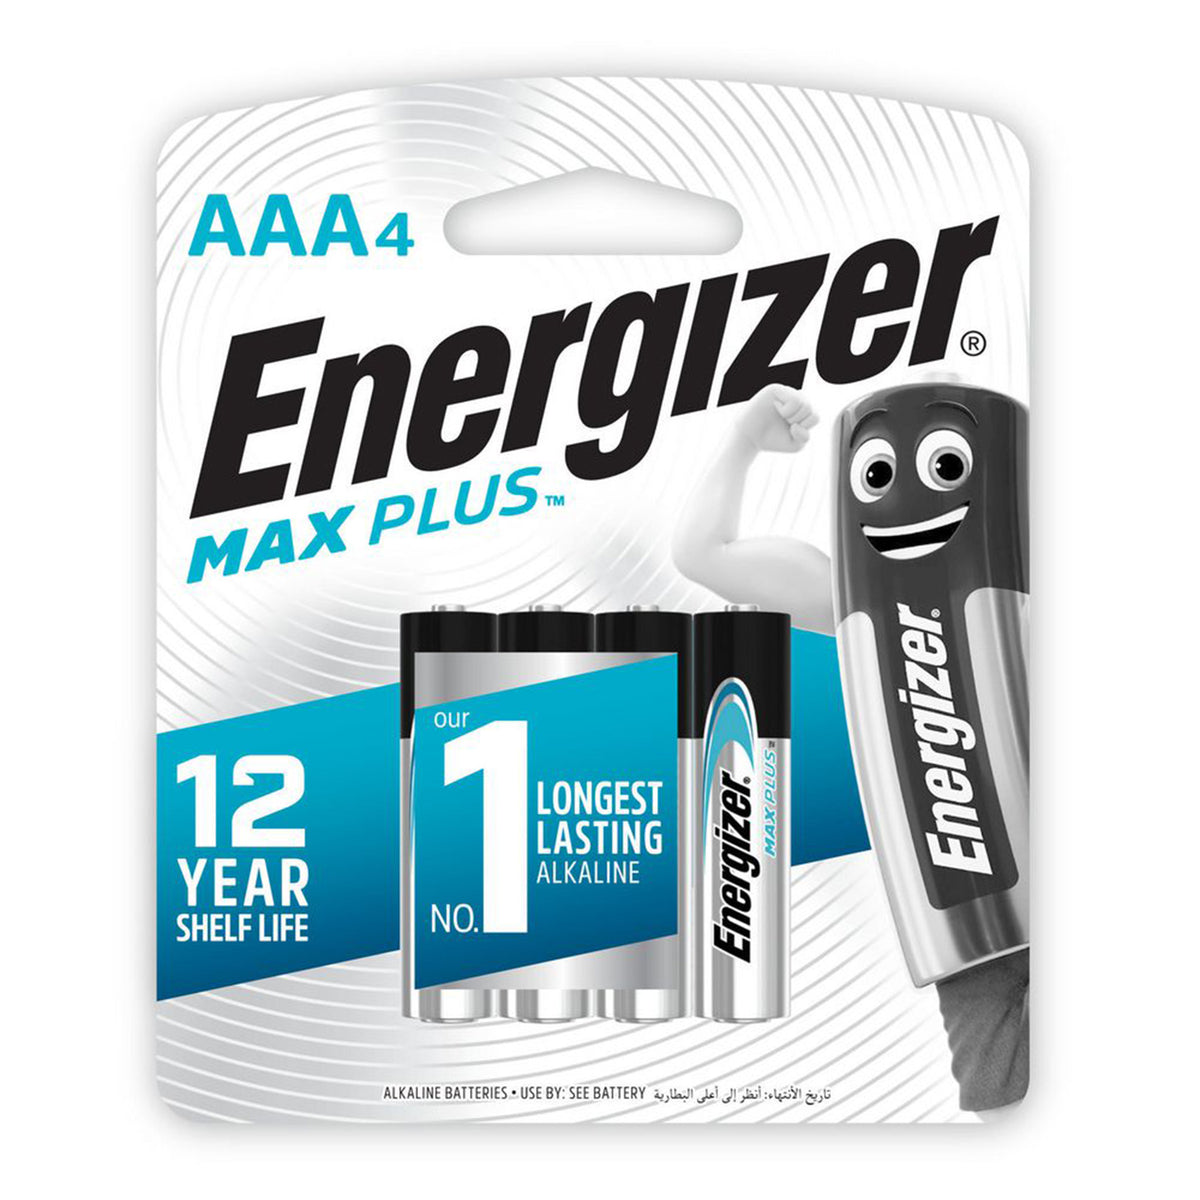 Energizer AAA Max Plus - 4 PcsQuantity: 4 Batteries